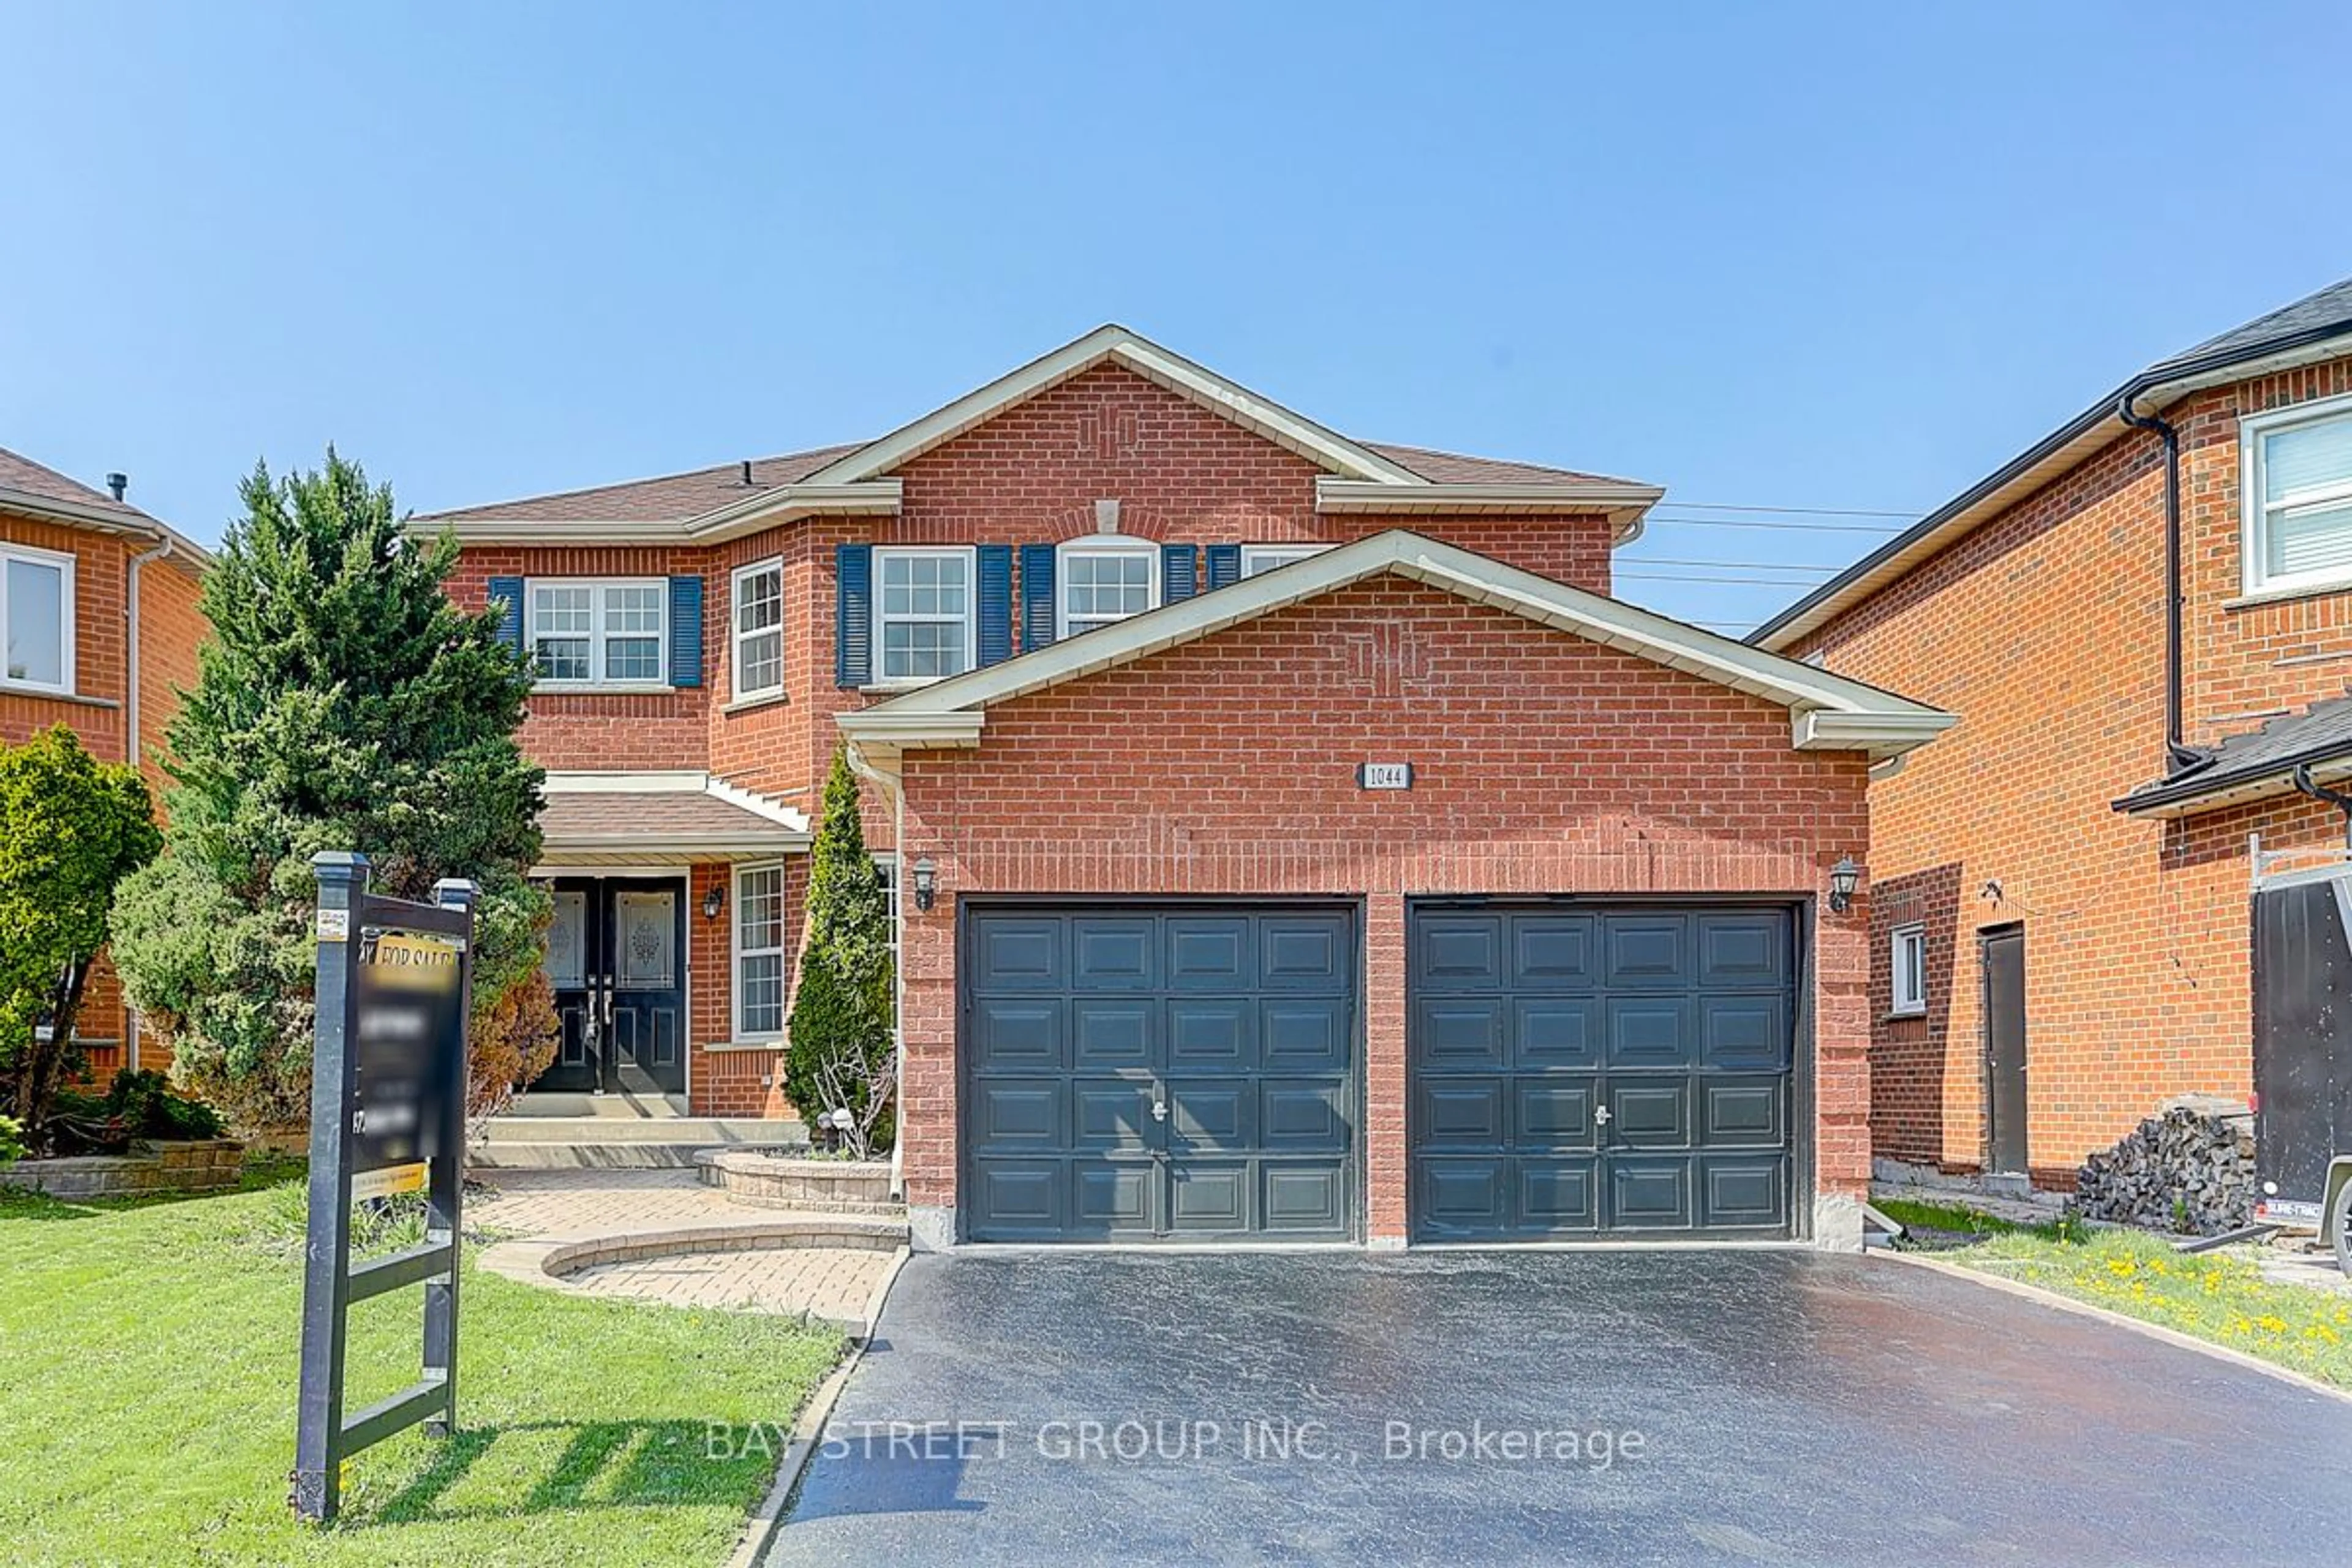 Home with brick exterior material for 1044 Sandcliff Dr, Oshawa Ontario L1K 2E5